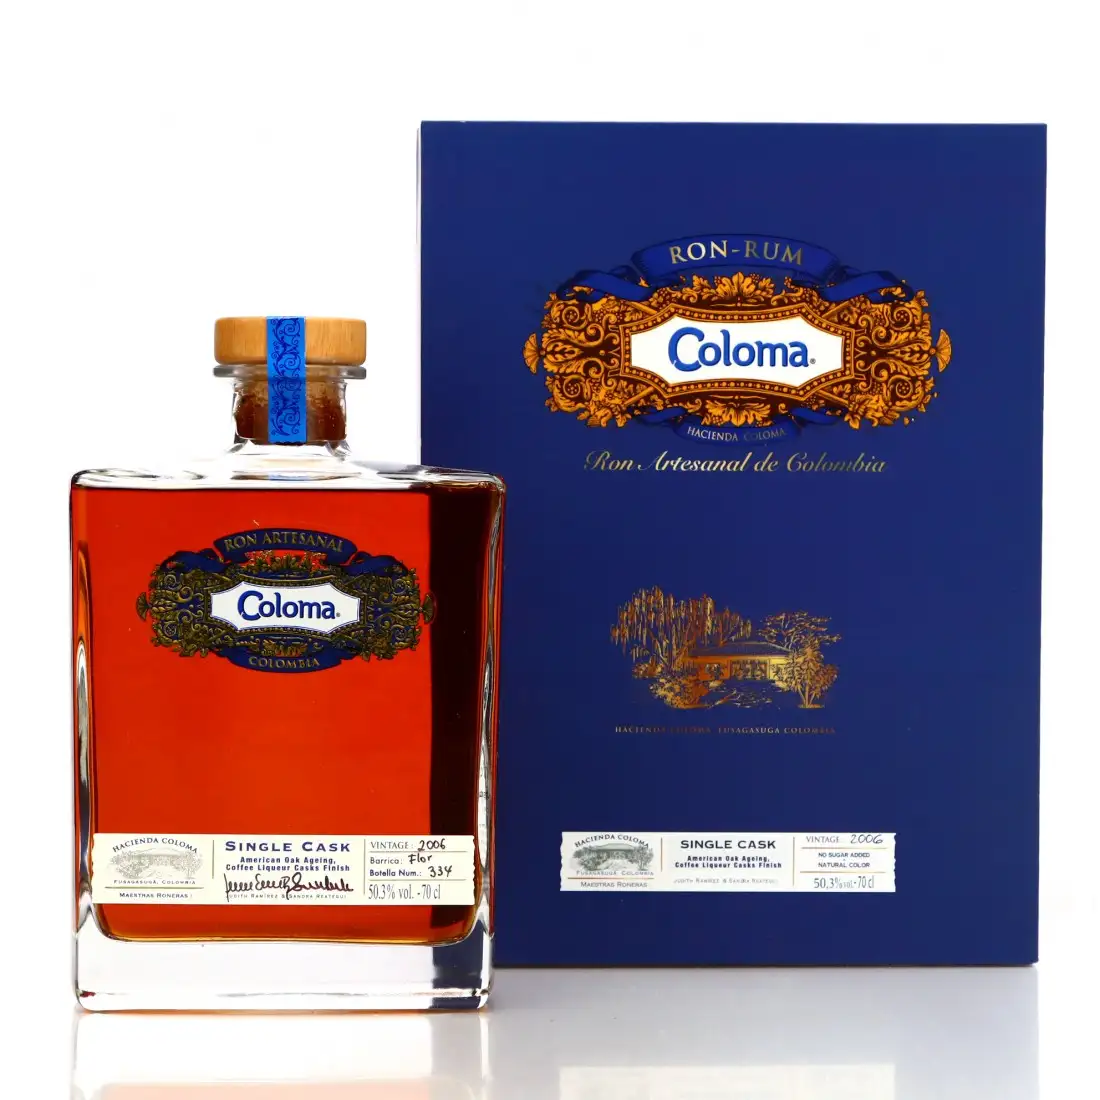 Image of the front of the bottle of the rum Coloma